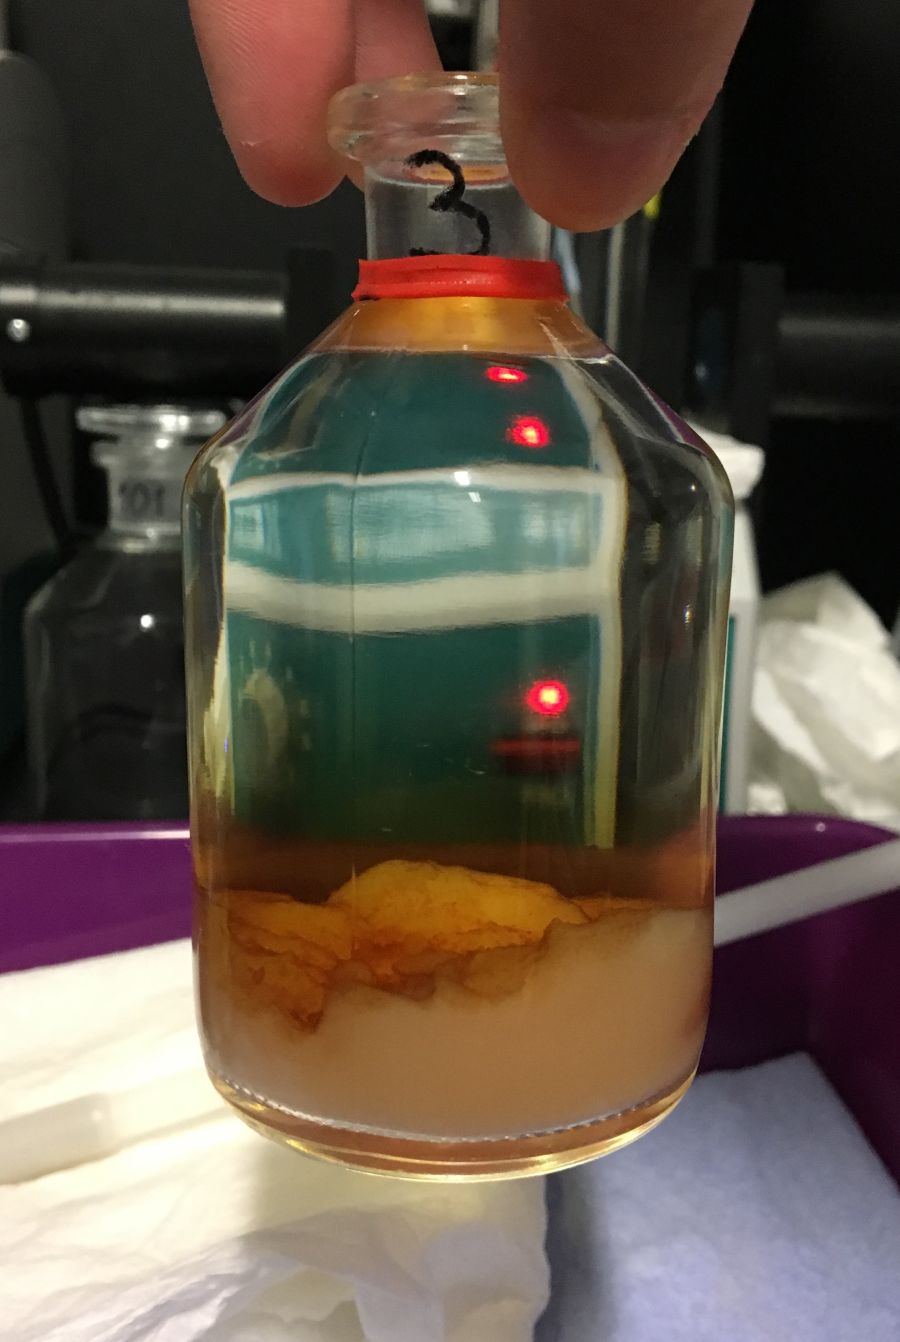 Acid addition turning the precipitate into brown jelly